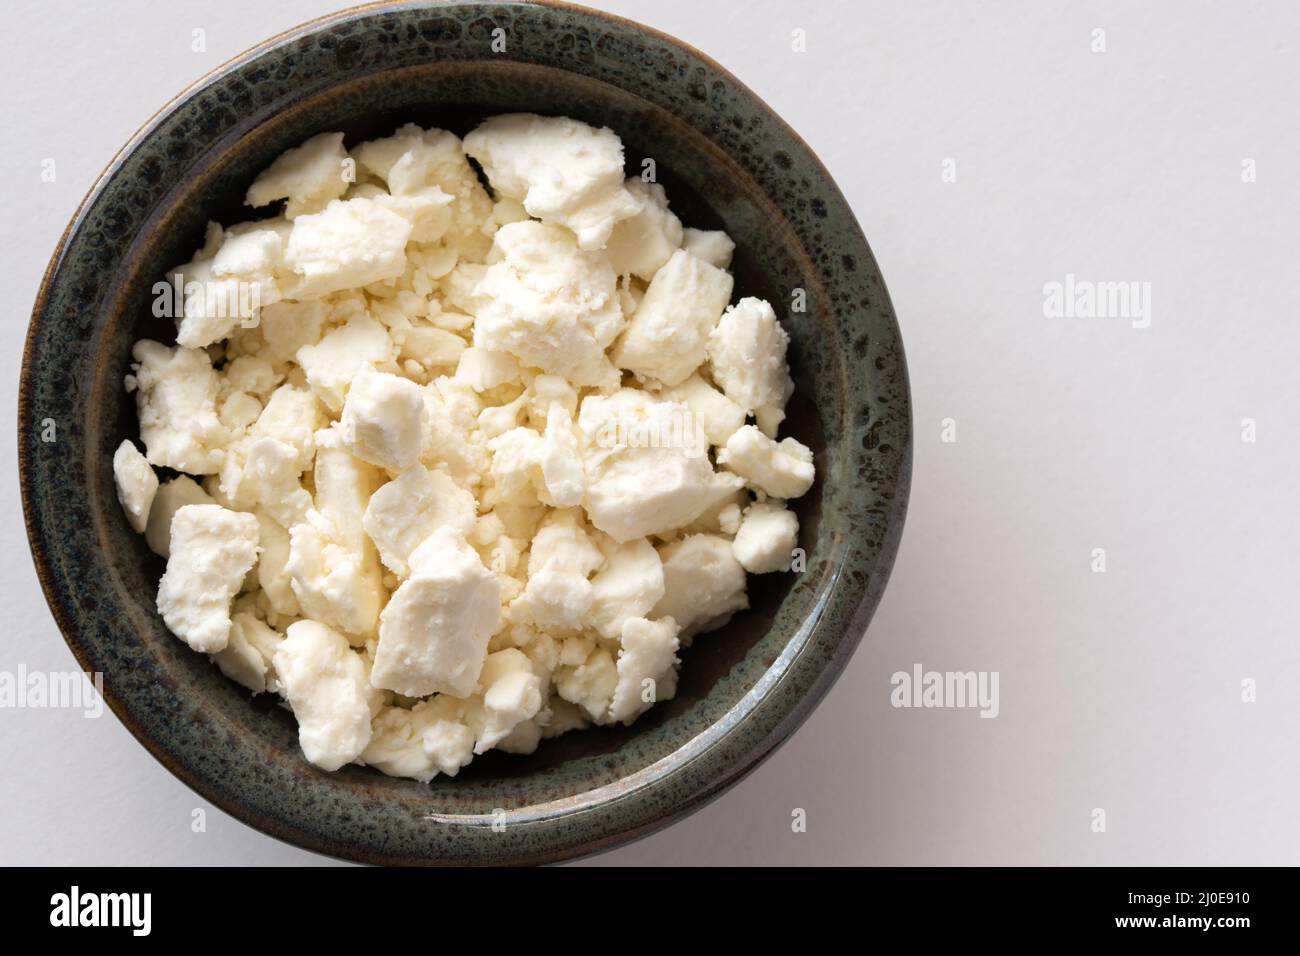 Feta Cheese Crumbles in a Bowl Stock Photo